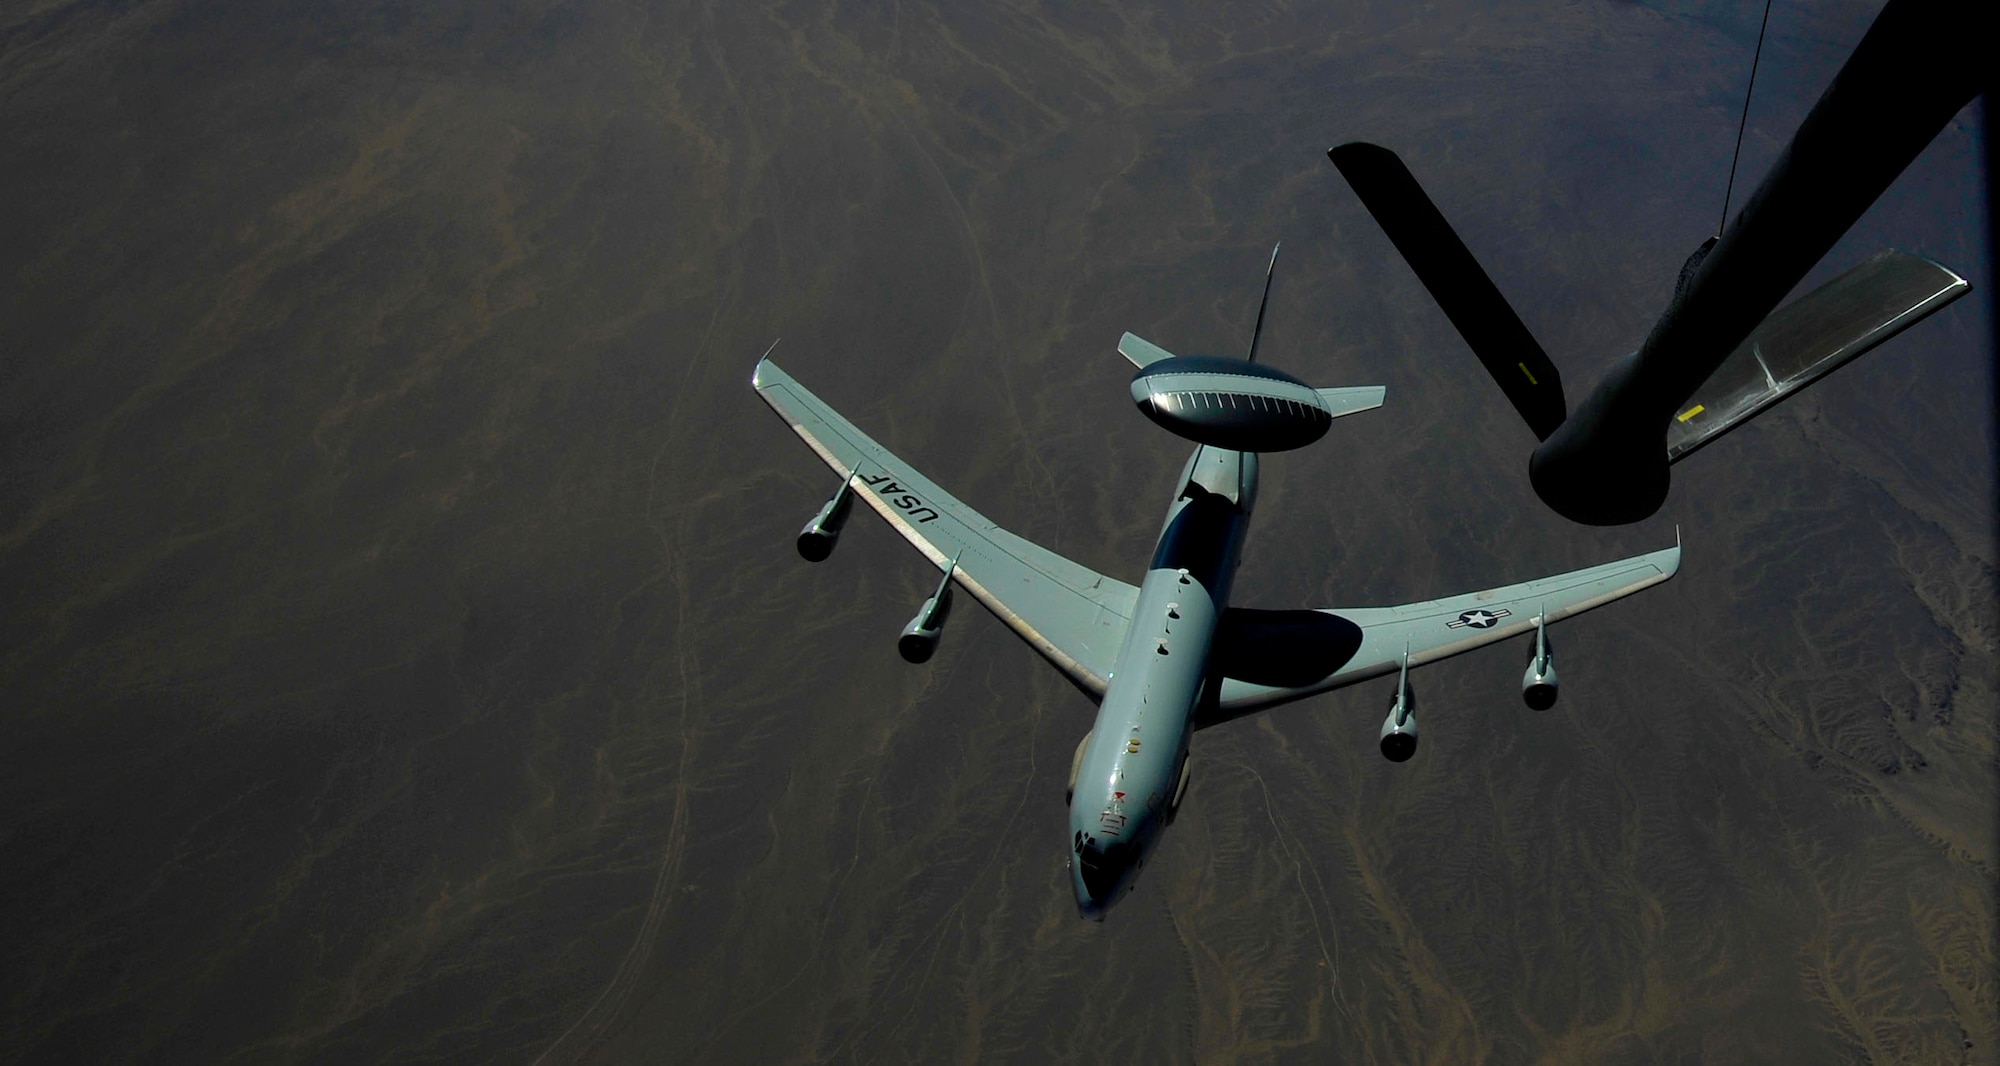 U.S. Air Force Airmen from the 340th Expeditionary Air Refueling Squadron,  refuel an E-3 Sentry, Airborne Warning and Control System (AWACS) aircraft, Jan.15, 2010, over Afghanistan.  The AWACS is an airborne radar system designed to detect and manage aircraft.  The E-3 is used at high altitudes and can distinguish between friendly and hostile aircraft from hundreds miles away. (U.S. Air Force photo/ SSgt Angelita Lawrence/released)